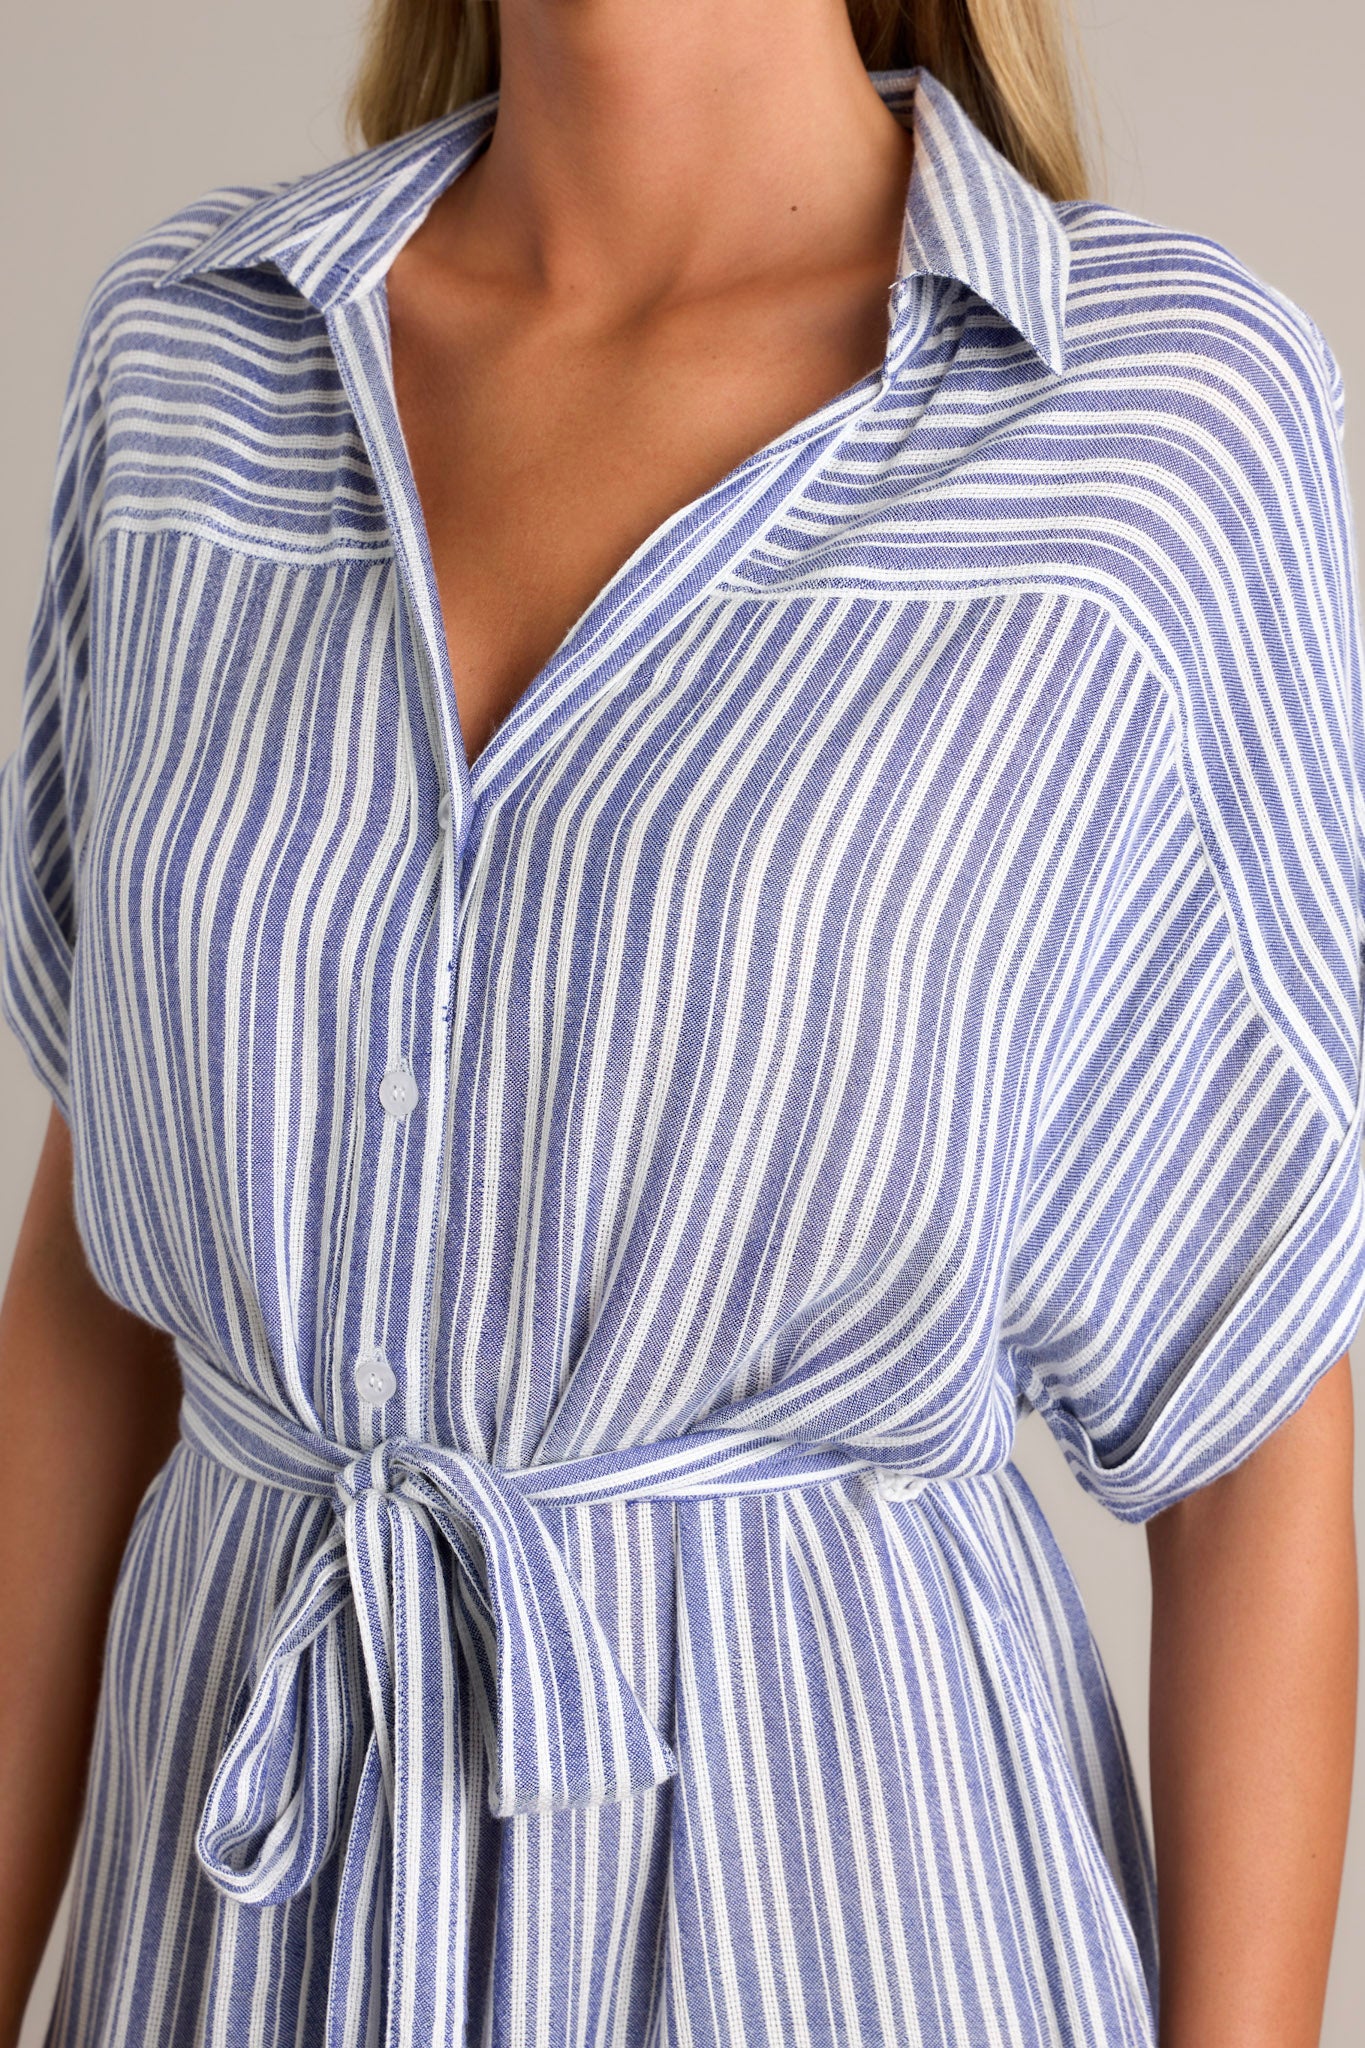 Close-up of the blue stripe midi dress showing the collared v-neckline, functional button front, and self-tie drawstring belt.